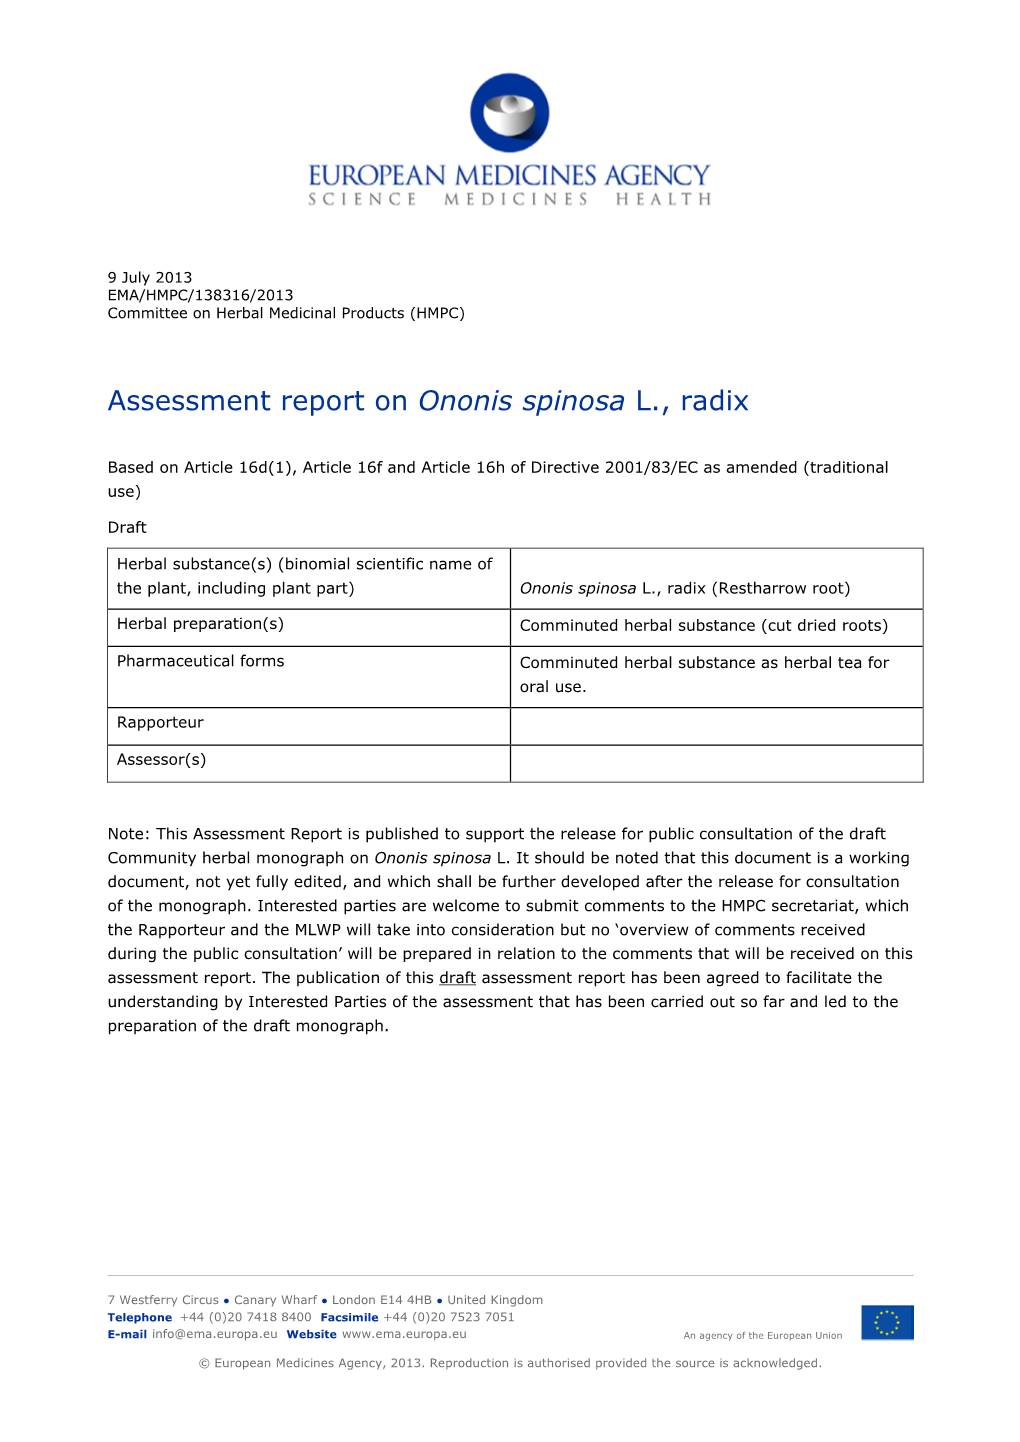 Assessment Report on Ononis Spinosa L., Radix